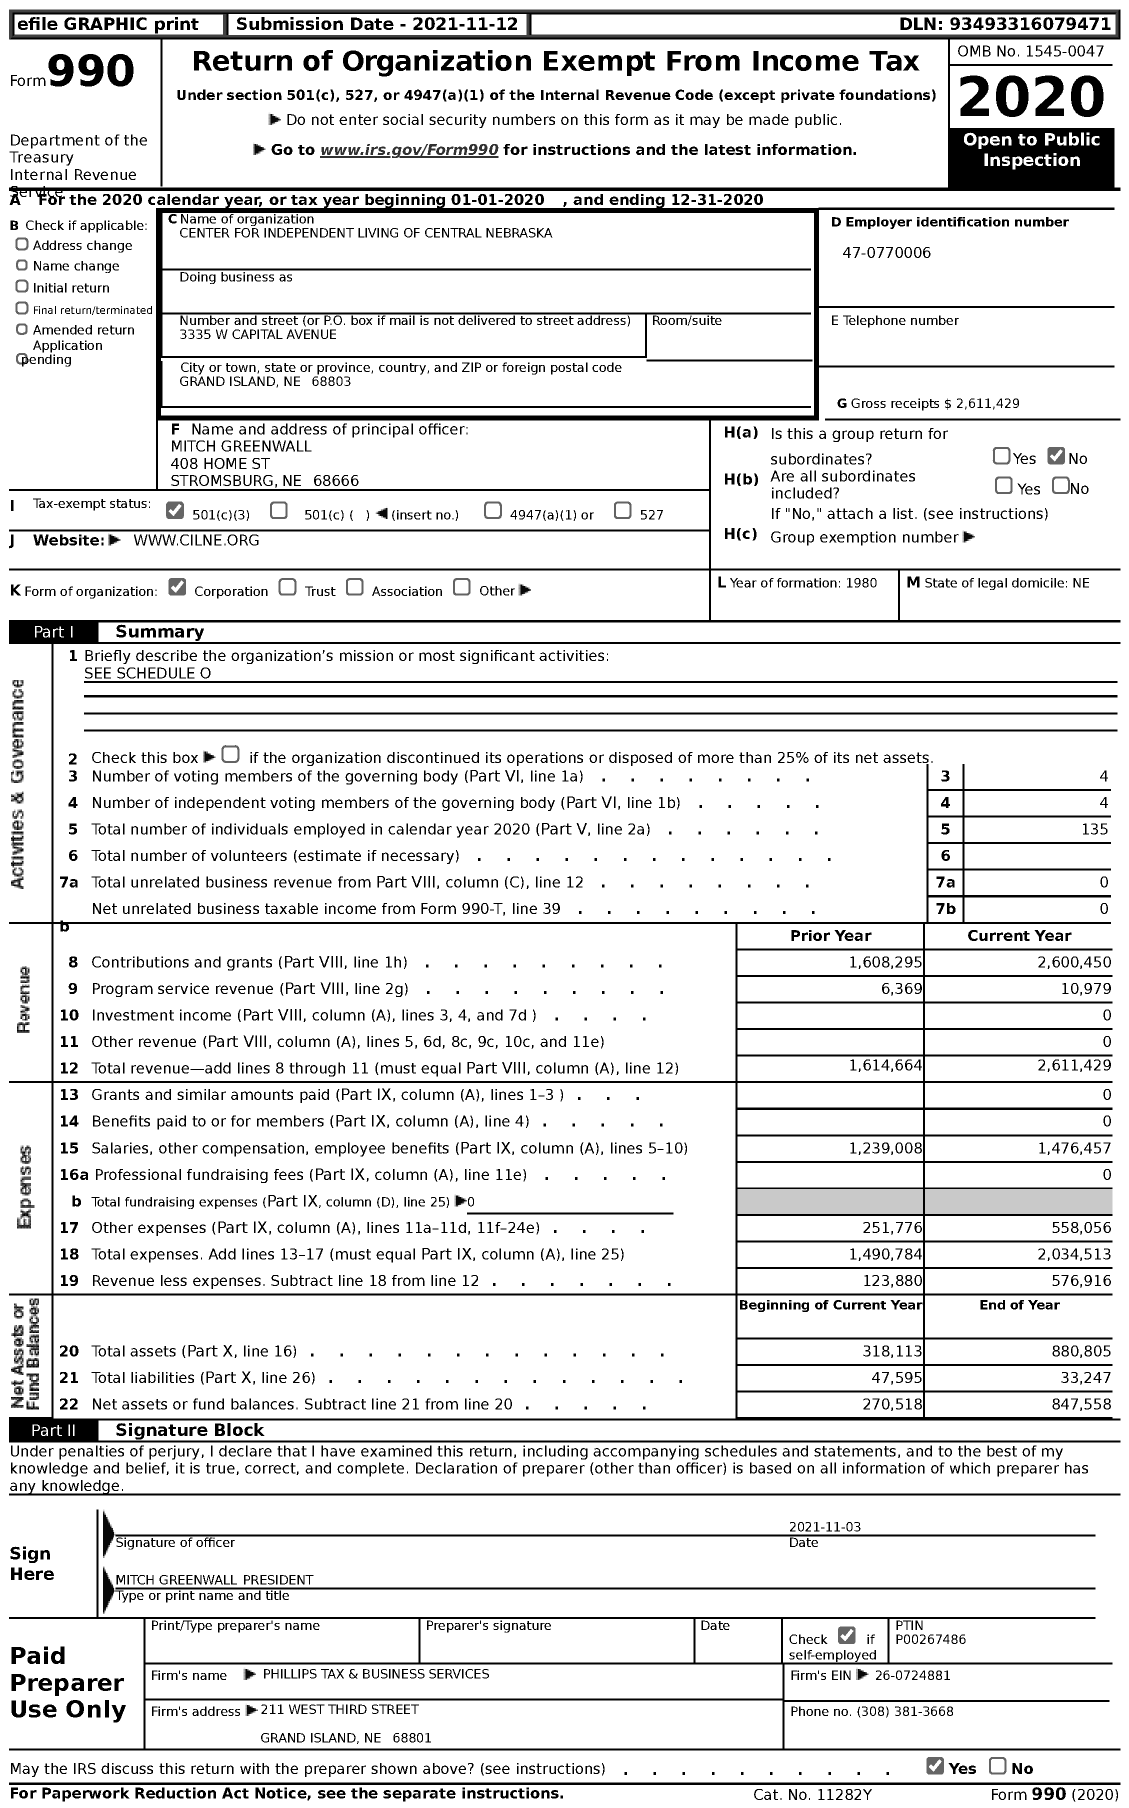 Image of first page of 2020 Form 990 for Center for Independent Living of Central Nebraska